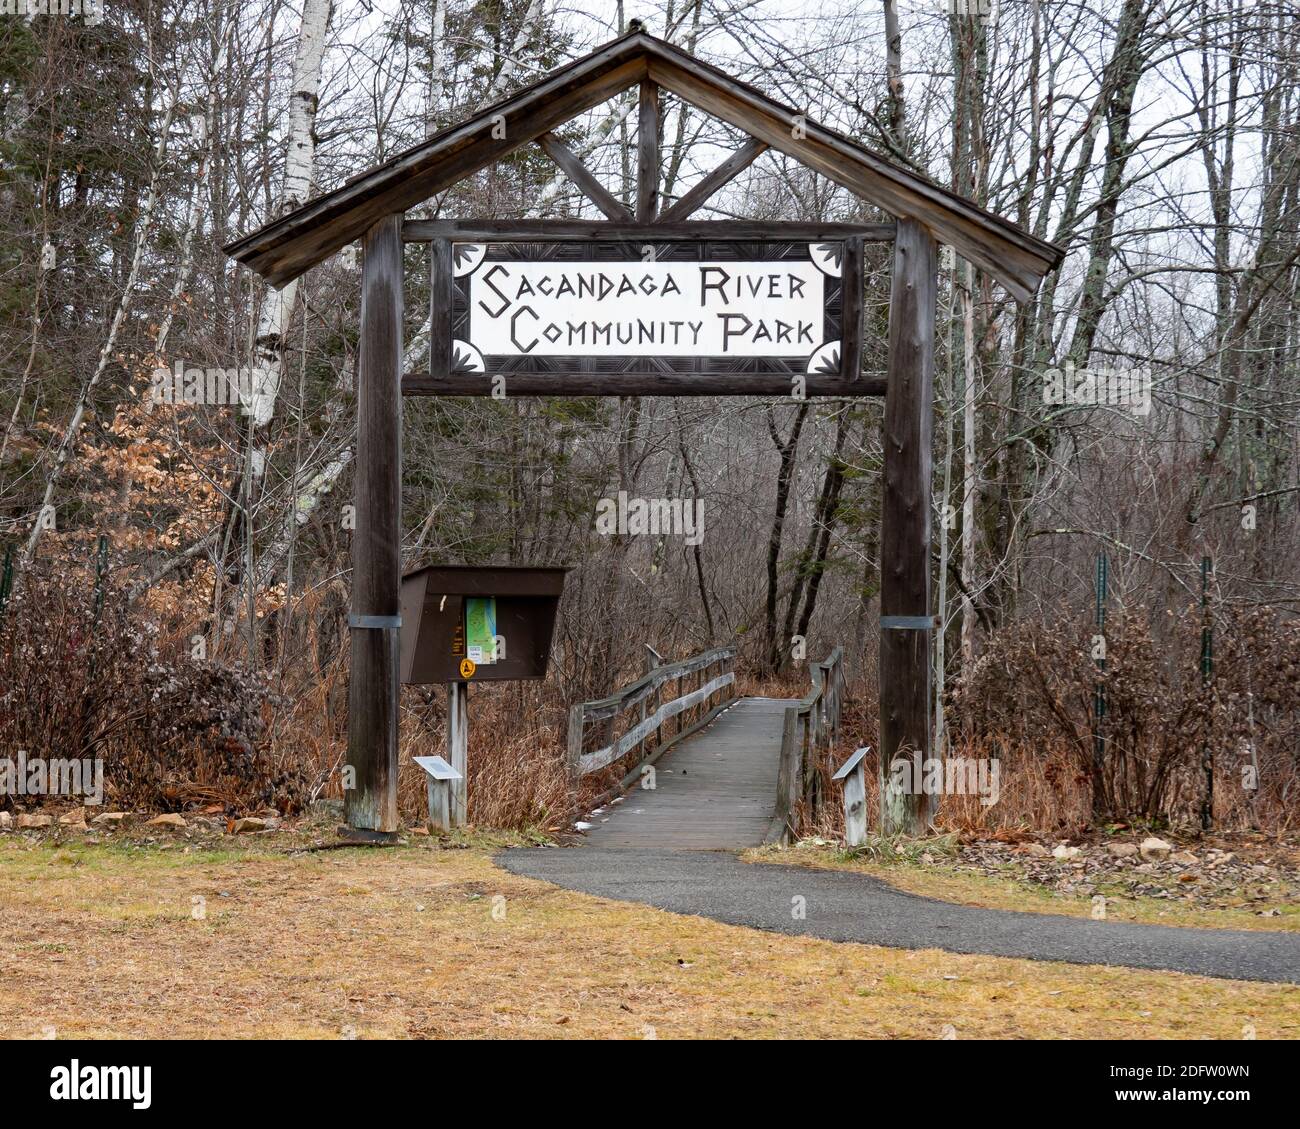 Entrance sign to the Sacandaga River Community Park with sign in stand and view of the boardwalk in early winter in the Adirondack Mountains Stock Photo